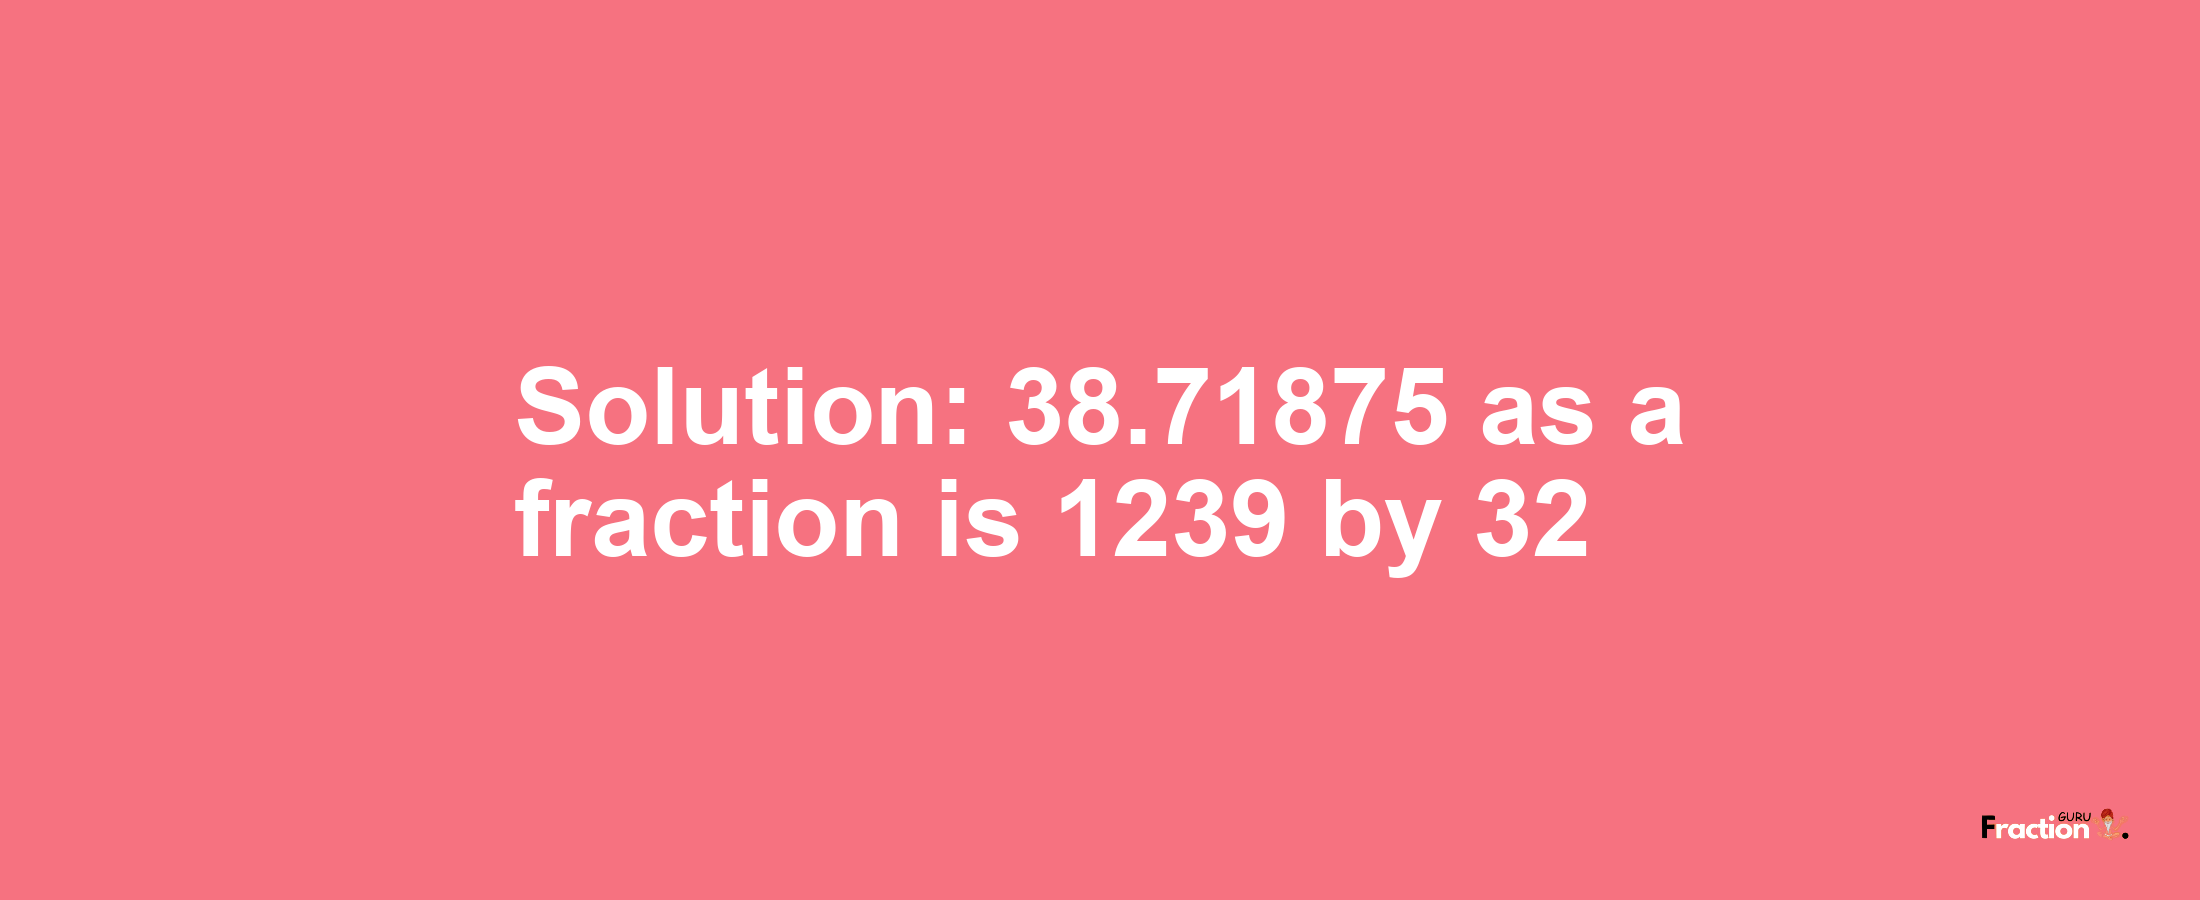 Solution:38.71875 as a fraction is 1239/32